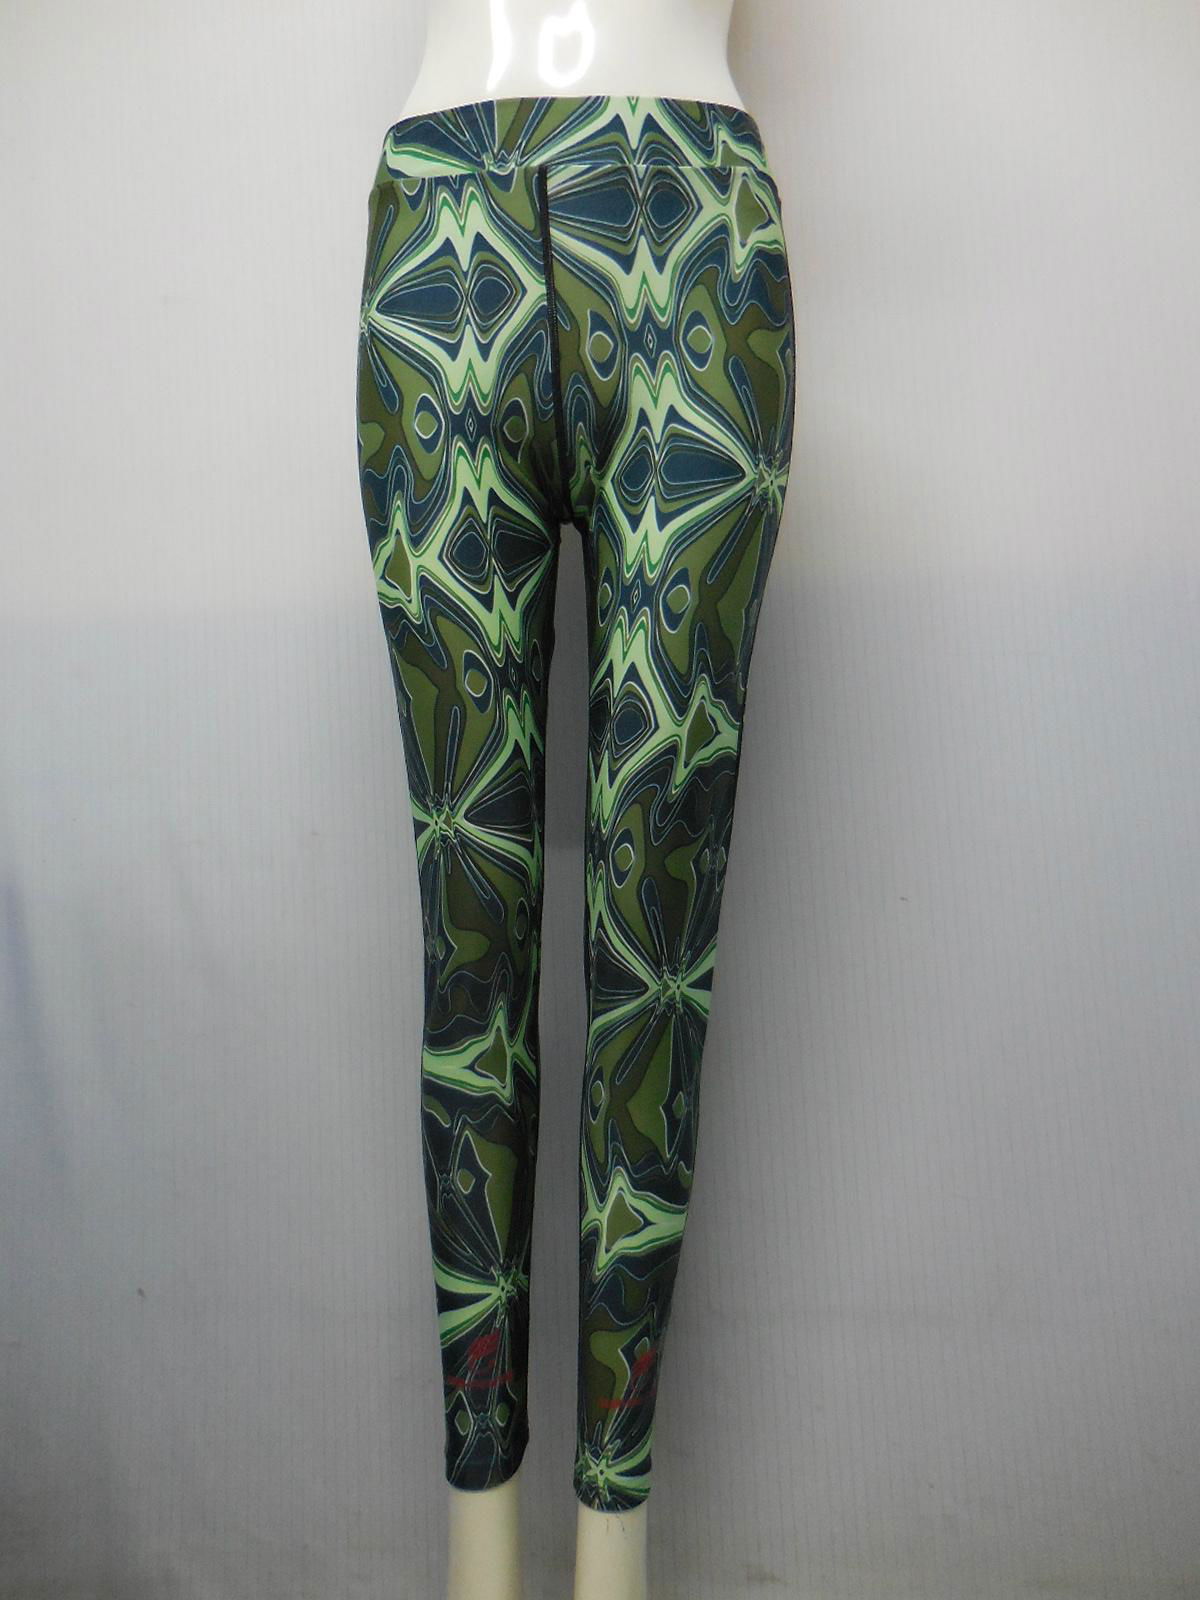 Hight Performance Dry Fit Spandex Compression Pants